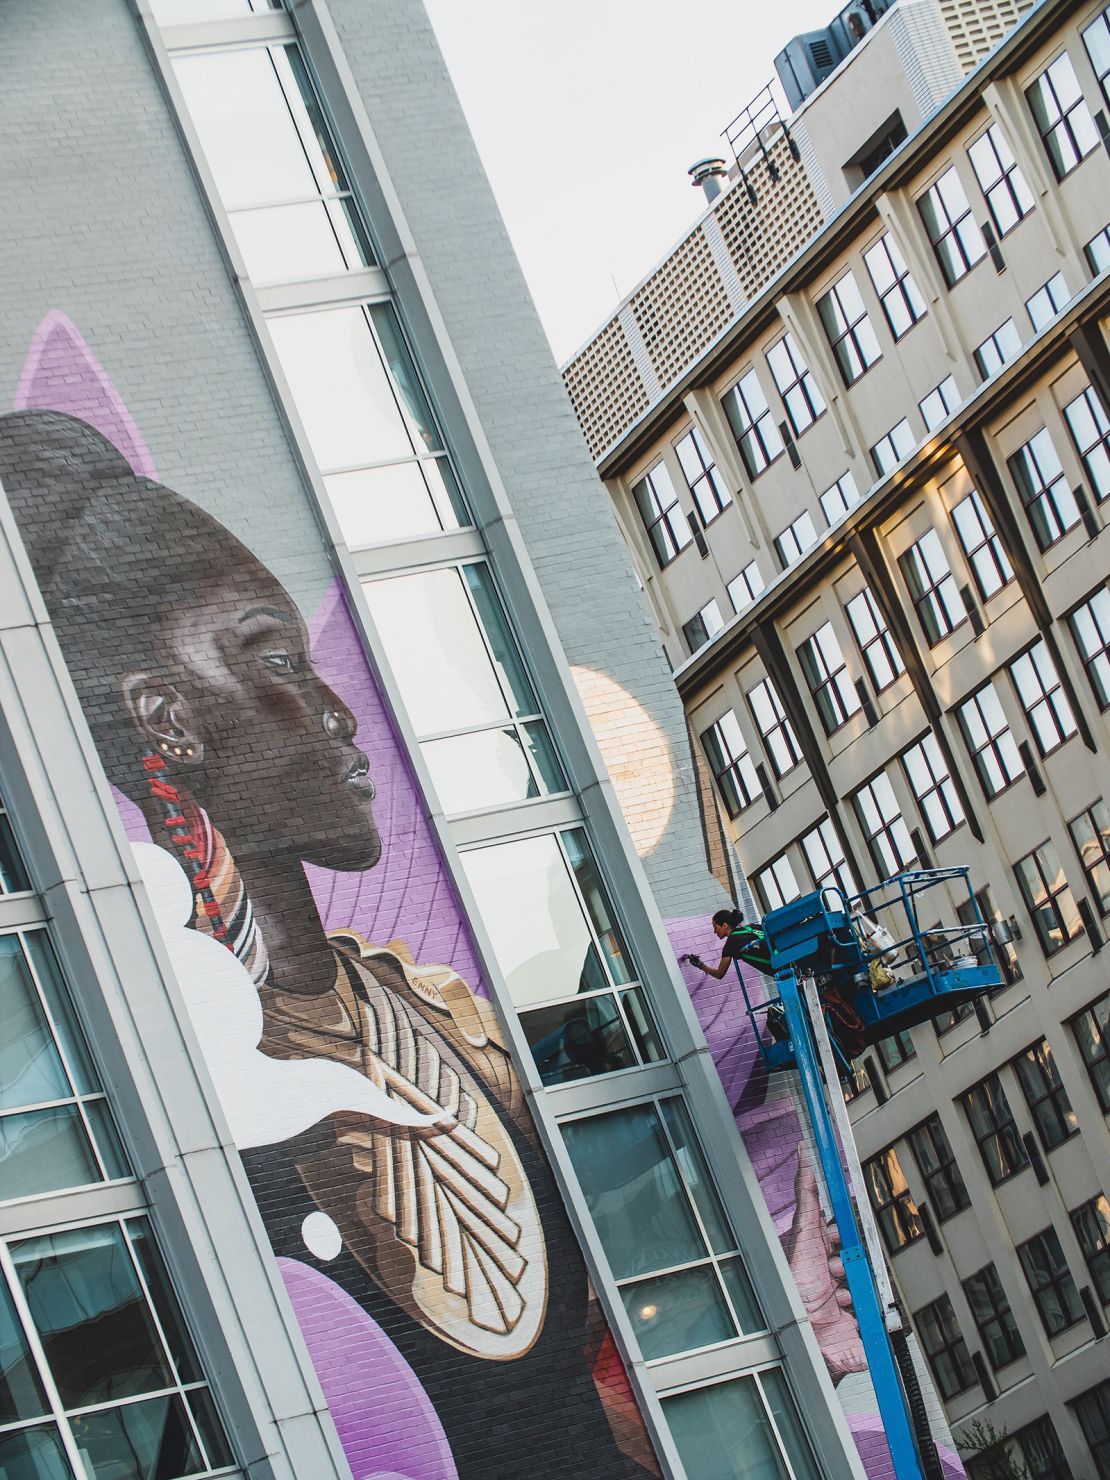 Work on "Guardians of the Four Directions" took place at the very beginning of the coronavirus outbreak and required the artist to be lifted as high as 120 feet from street level.